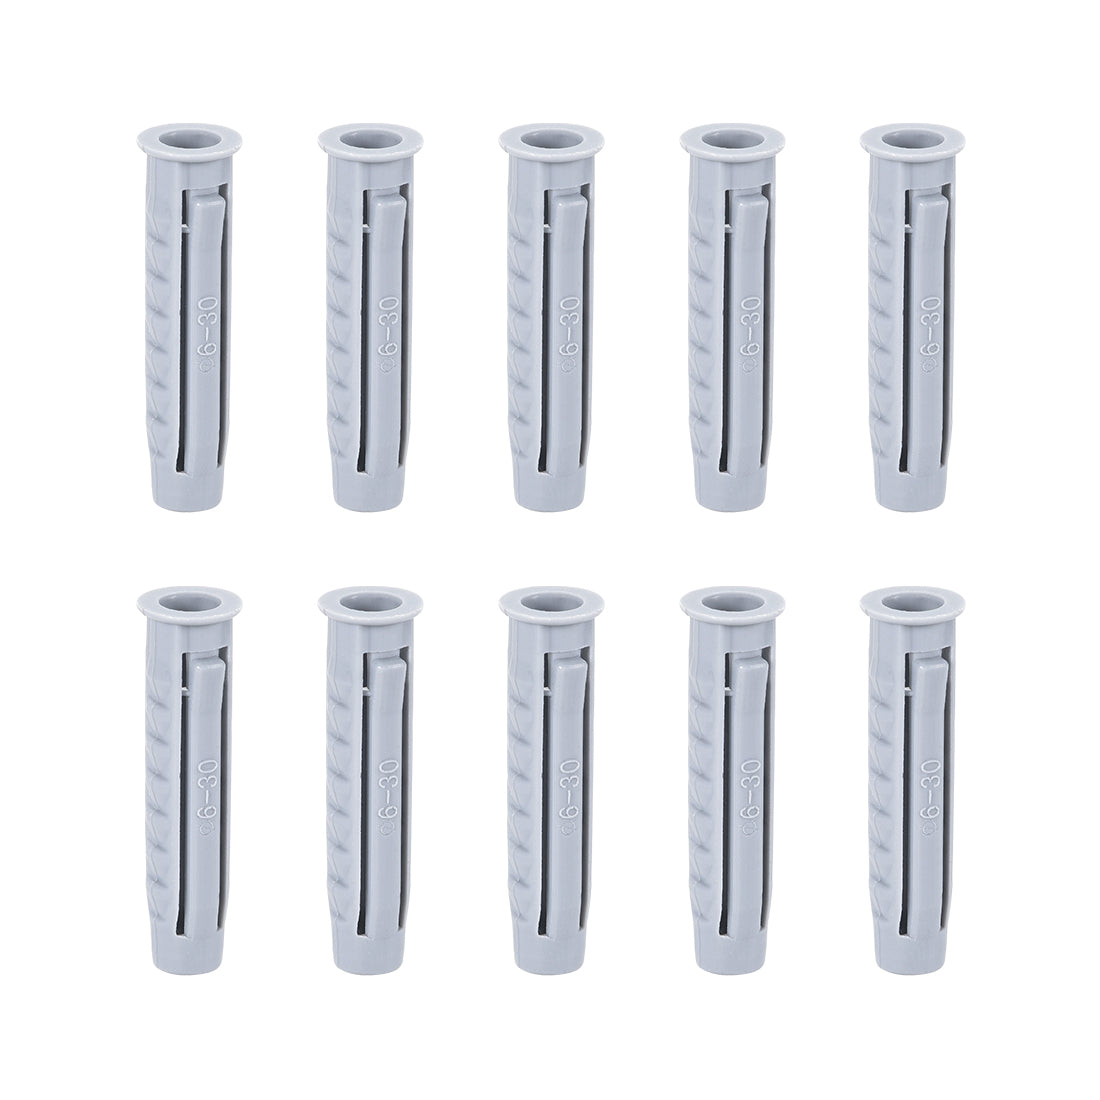 uxcell Uxcell 6x30mm Plastic Expansion Tube Bolts Column Frame Fixings Gray 60pcs